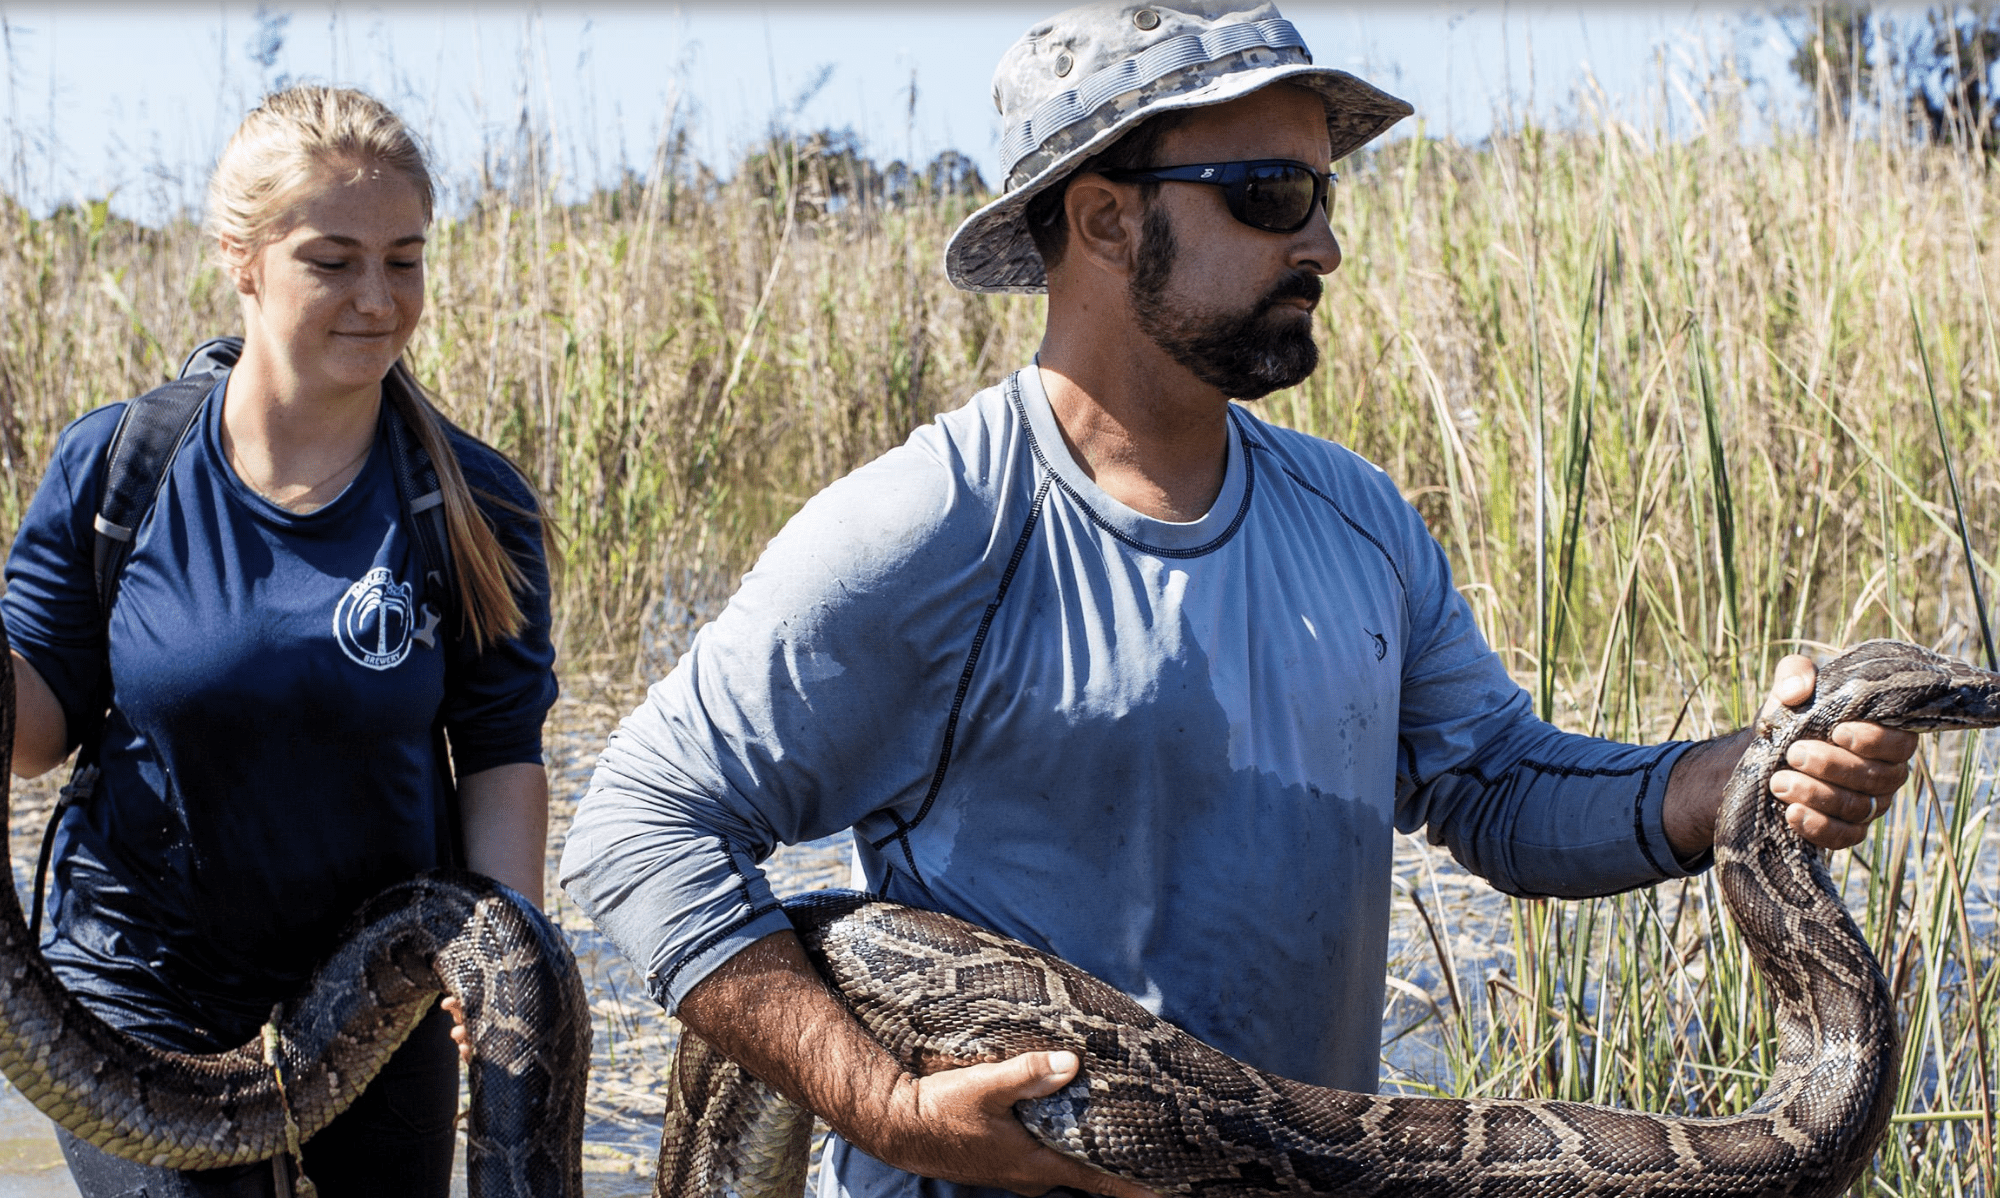 photo: giant pythons invasive species snakes in the Everglades